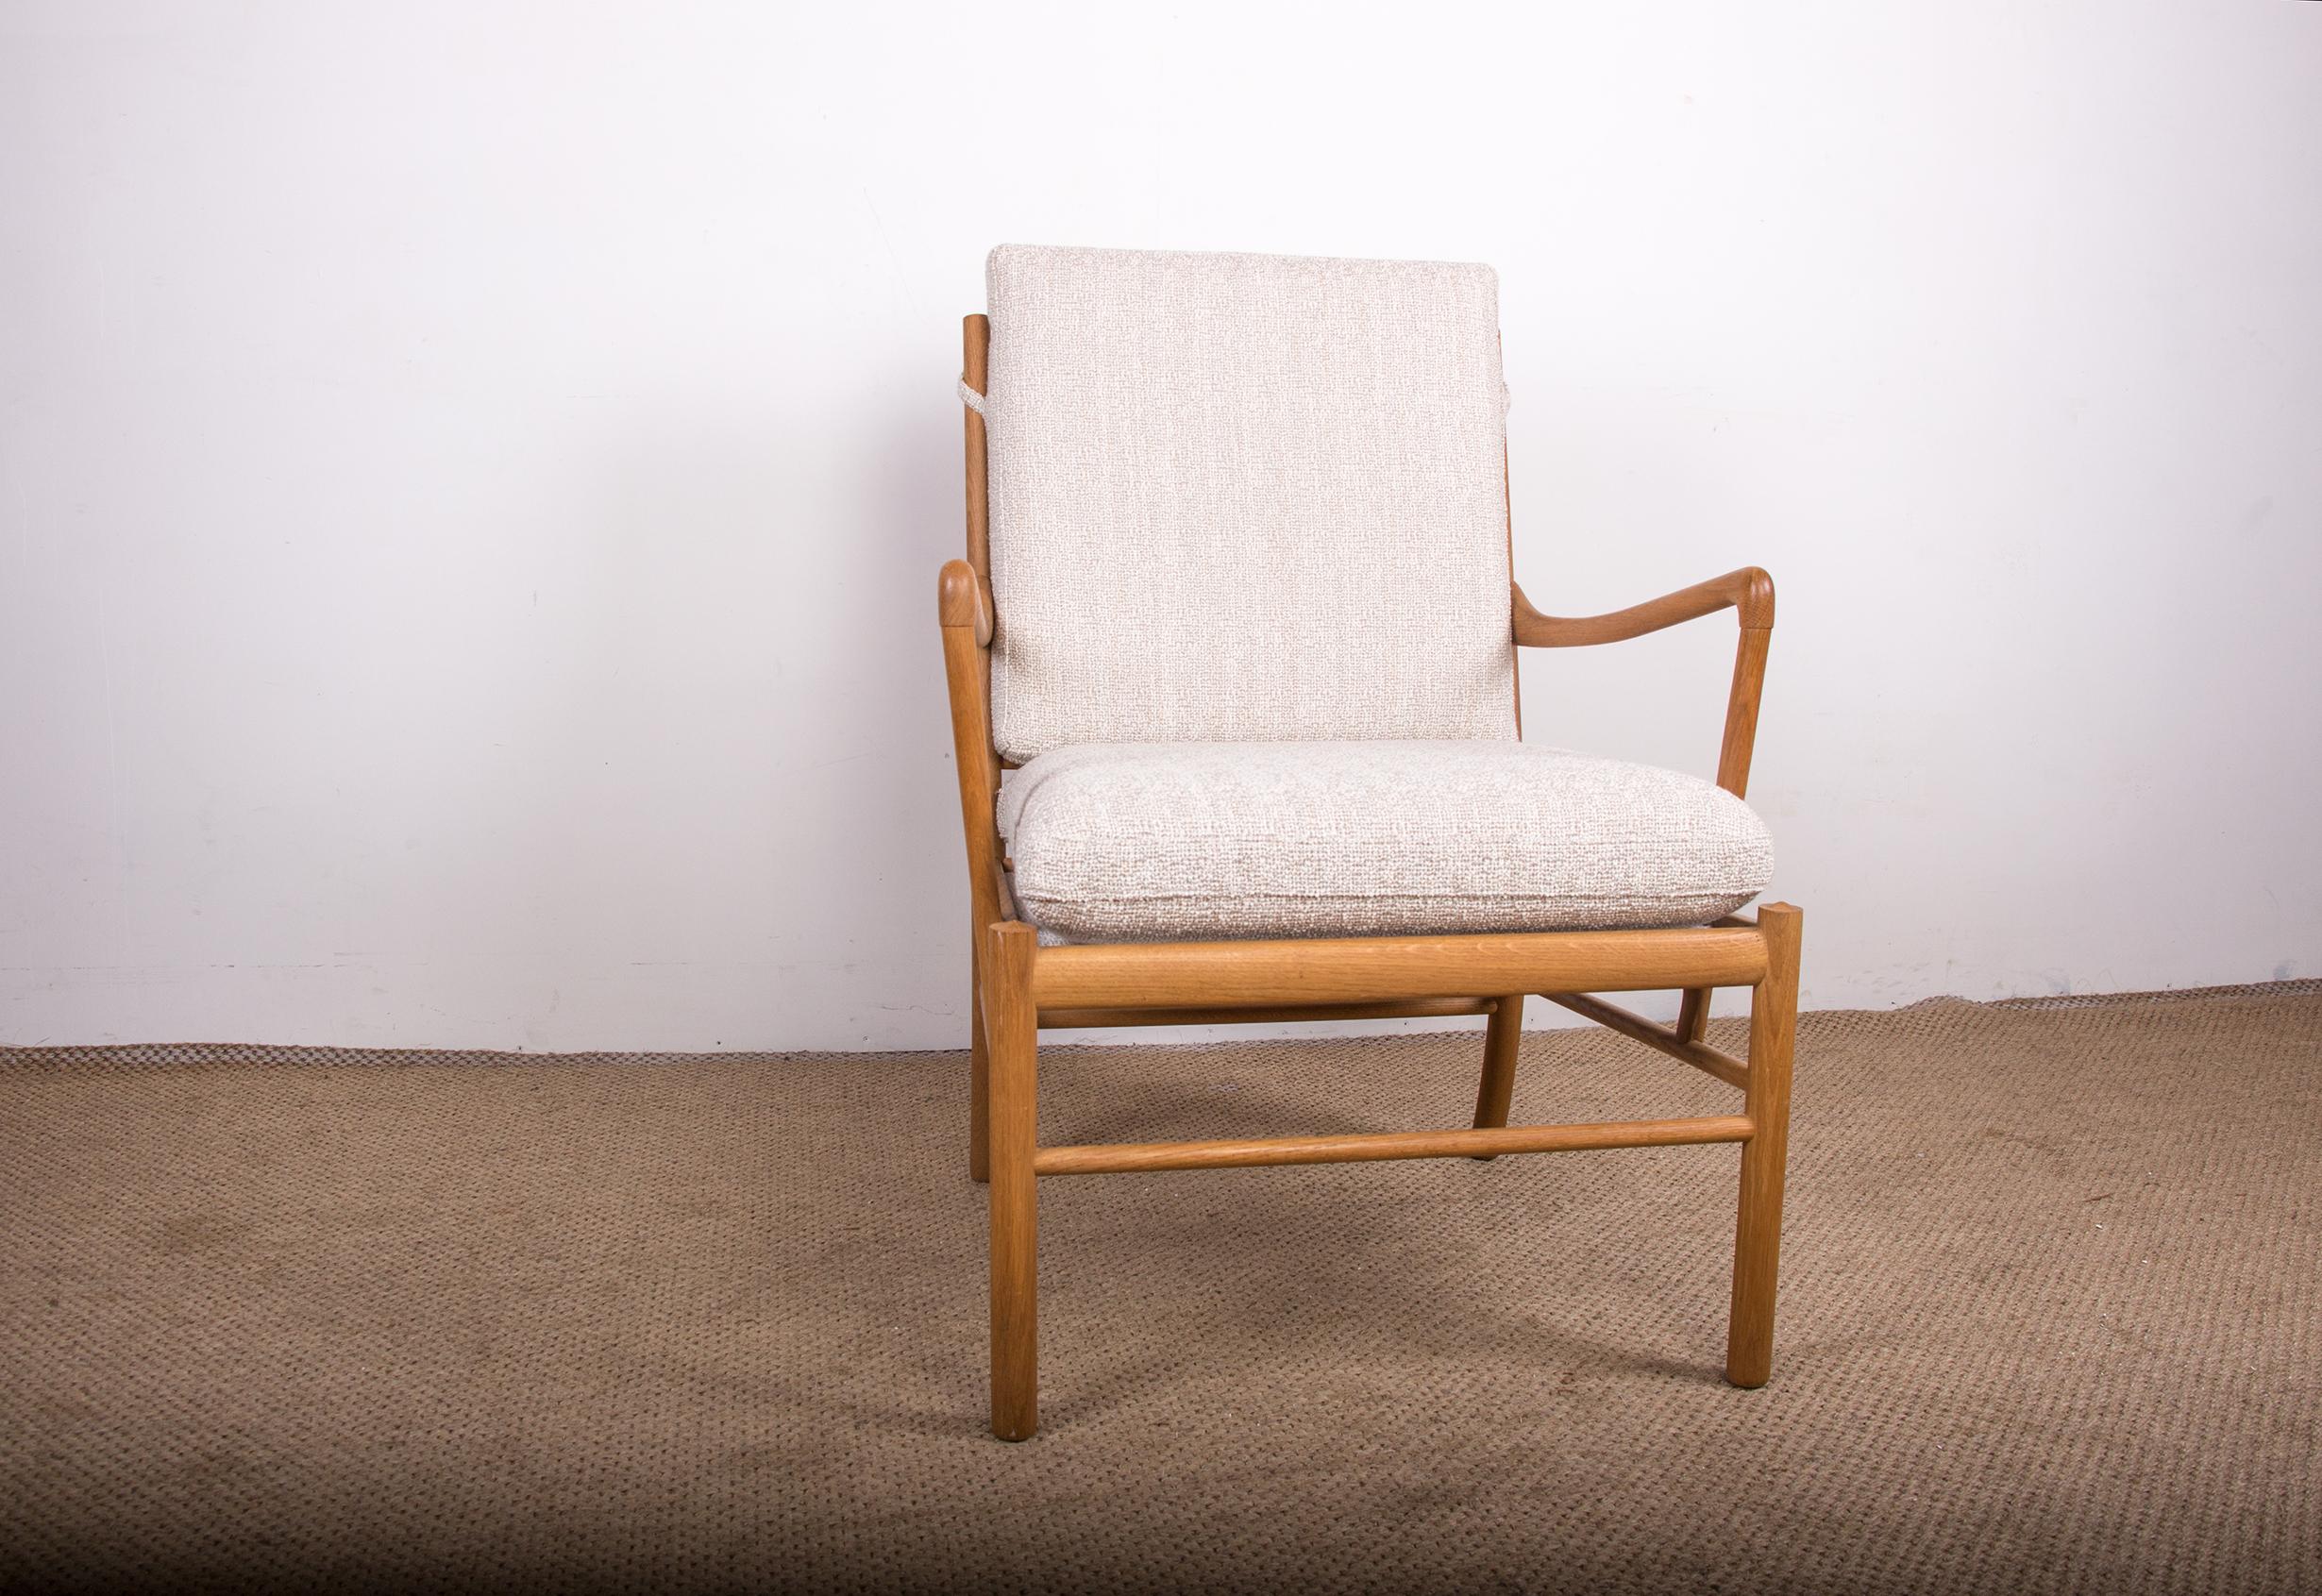 Superb Scandinavian armchair. Backrest and seat completely redone in cream terry fabric. Remarkable woodwork, finesse and elegance. Very high comfort. Very nice piece of furniture.